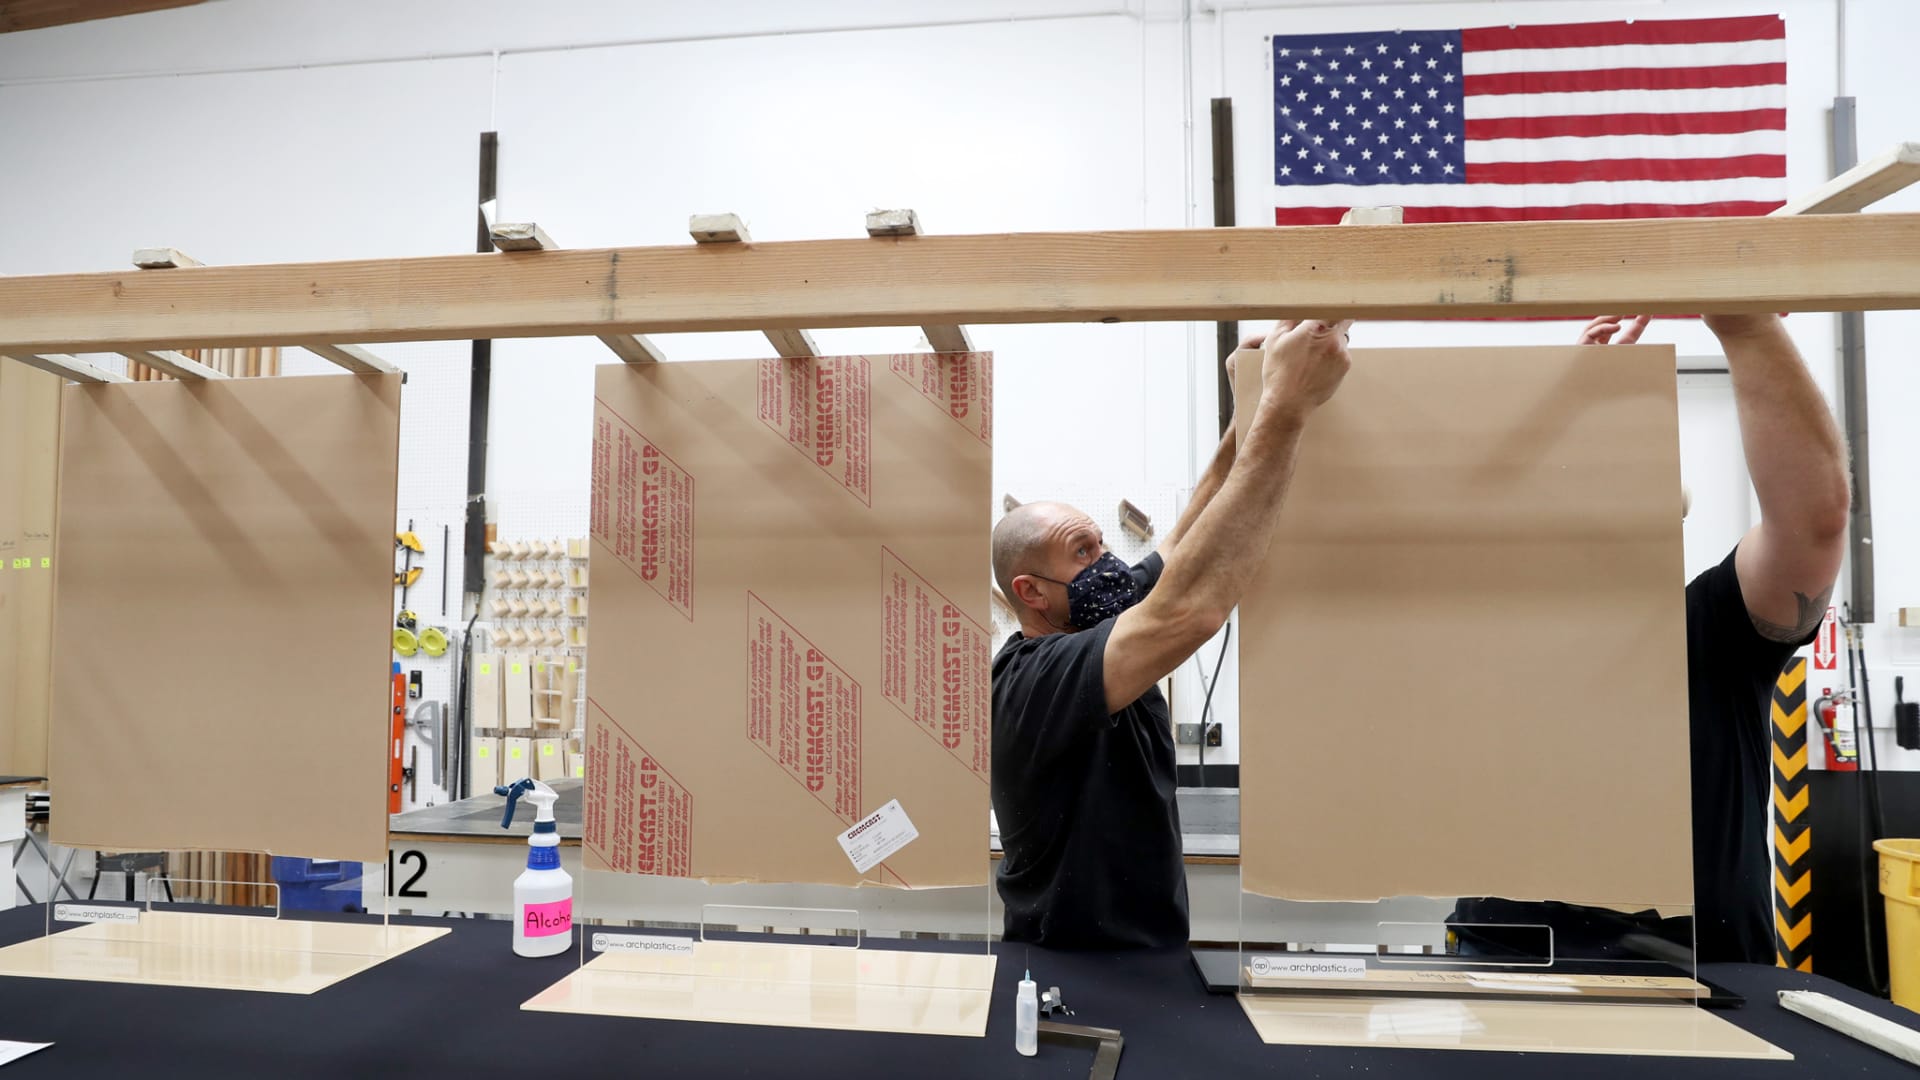 Architectural Plastics assembles acrylic sheets that will be used for social-distancing guards for businesses on May 7, 2020 in Petaluma, California.